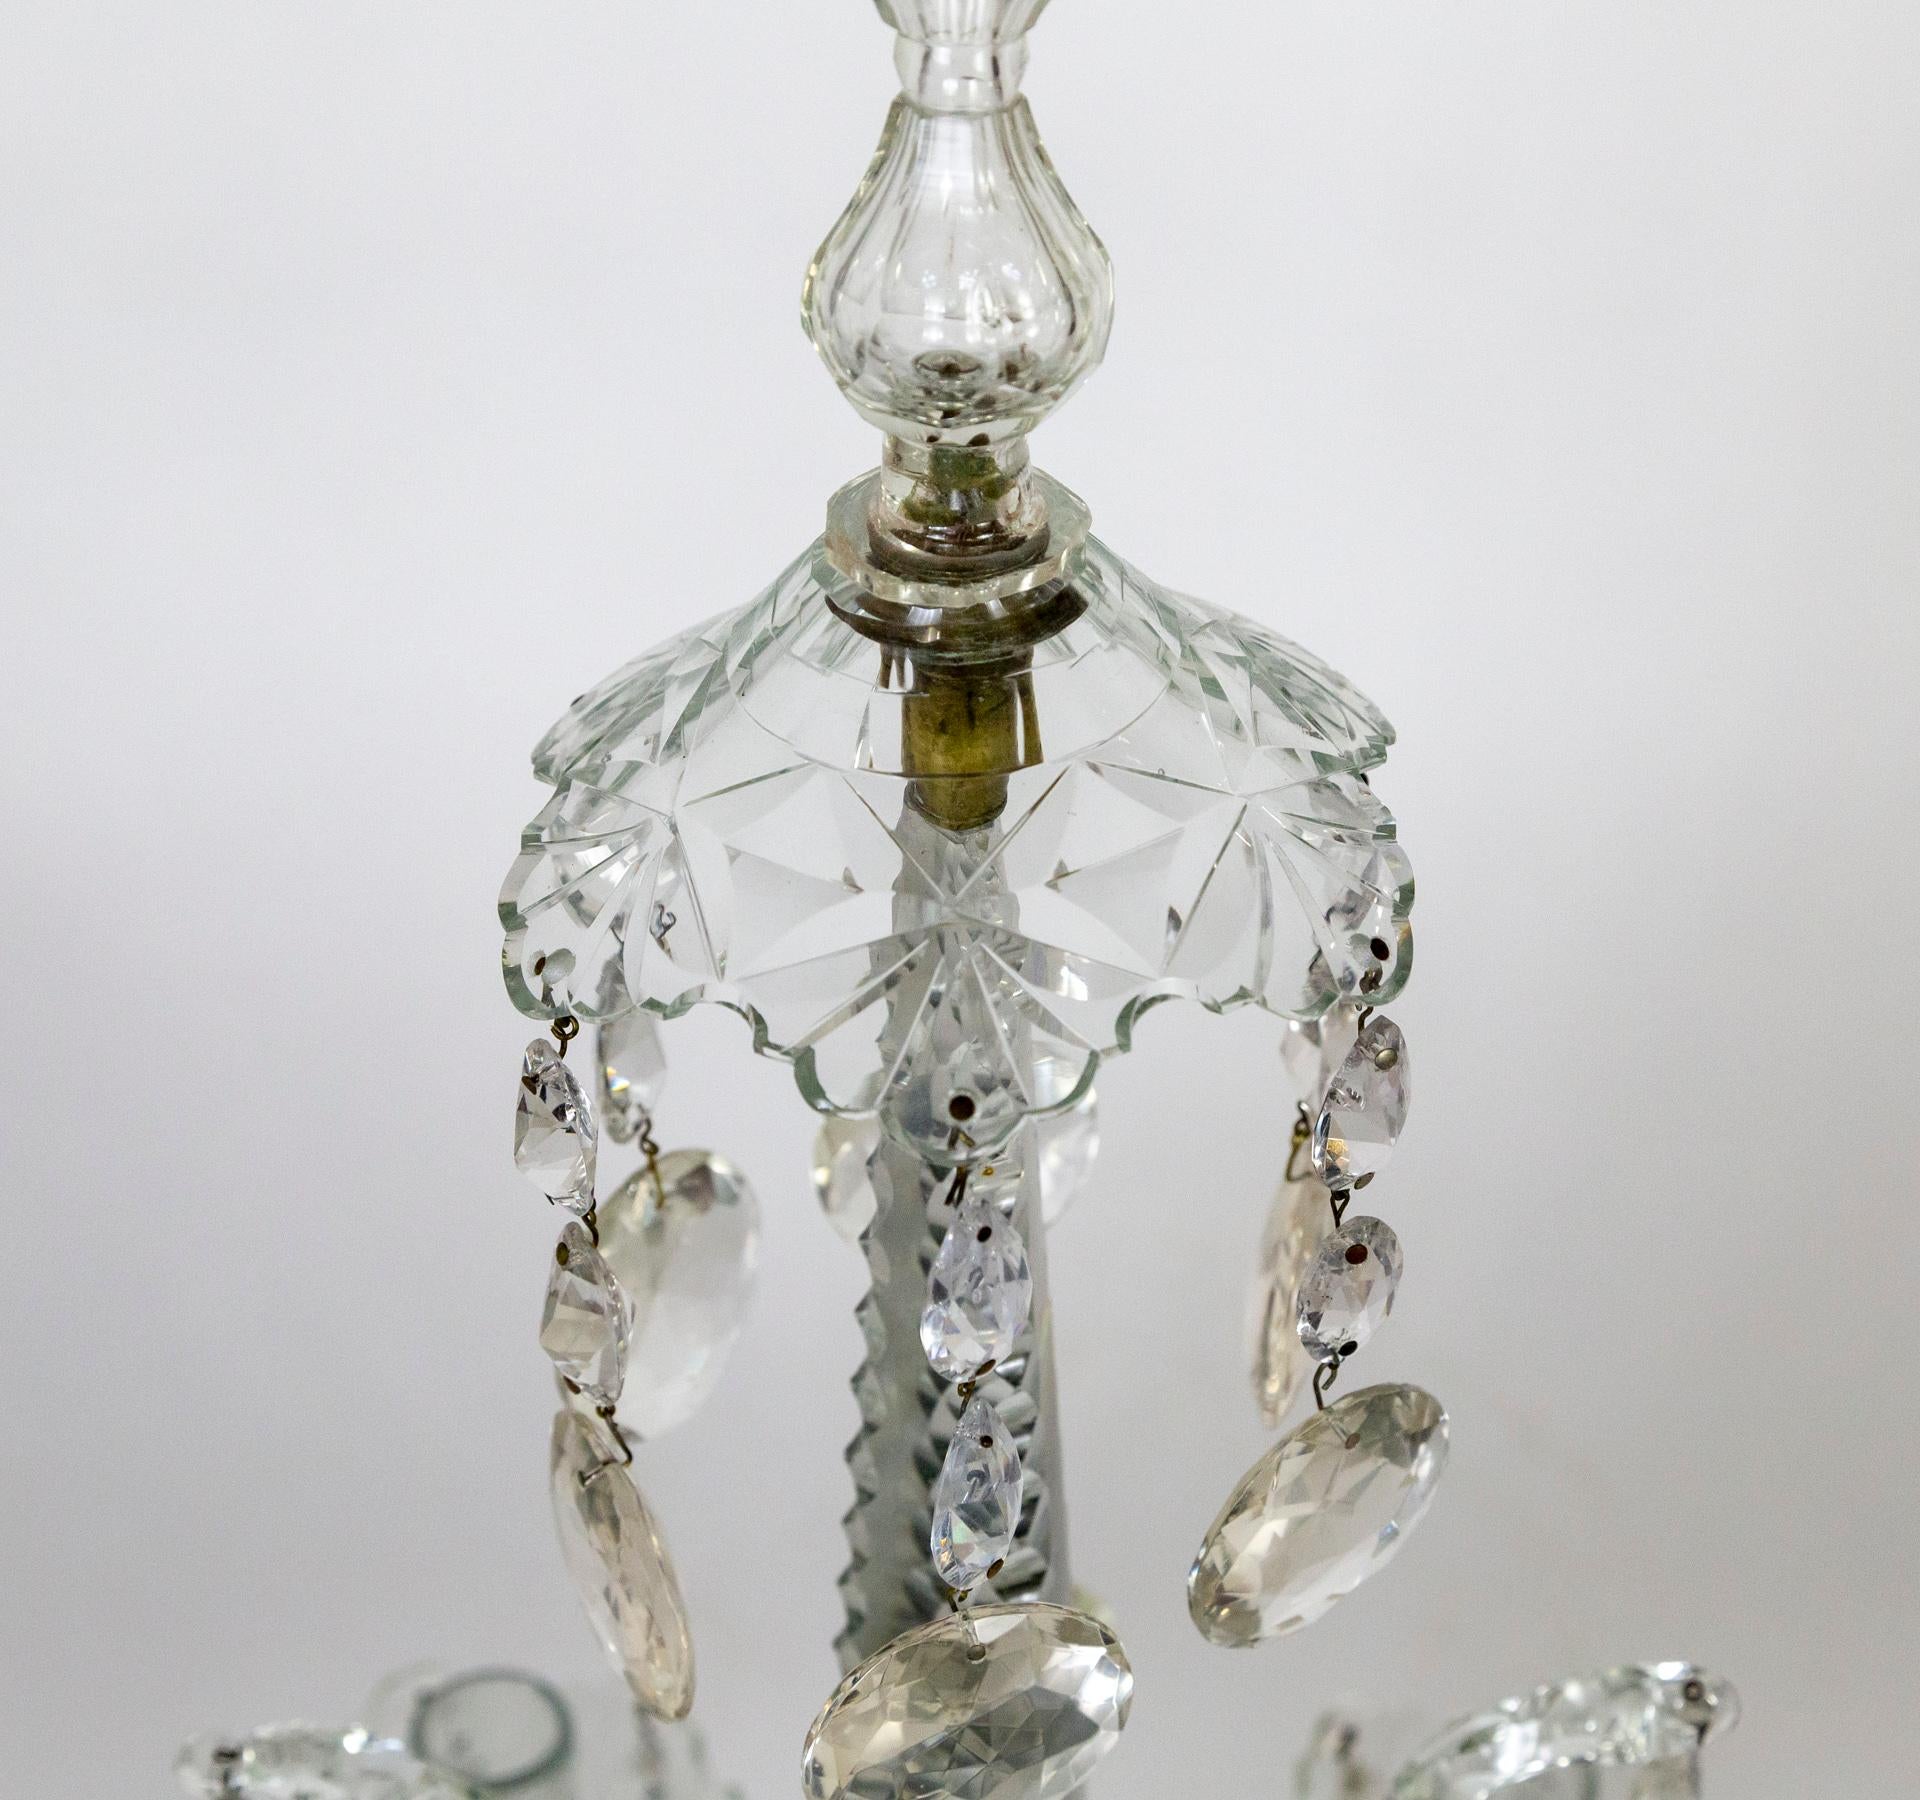 Henry iii 19th Cent. Cut Crystal 4-Arm Candelabra For Sale 8